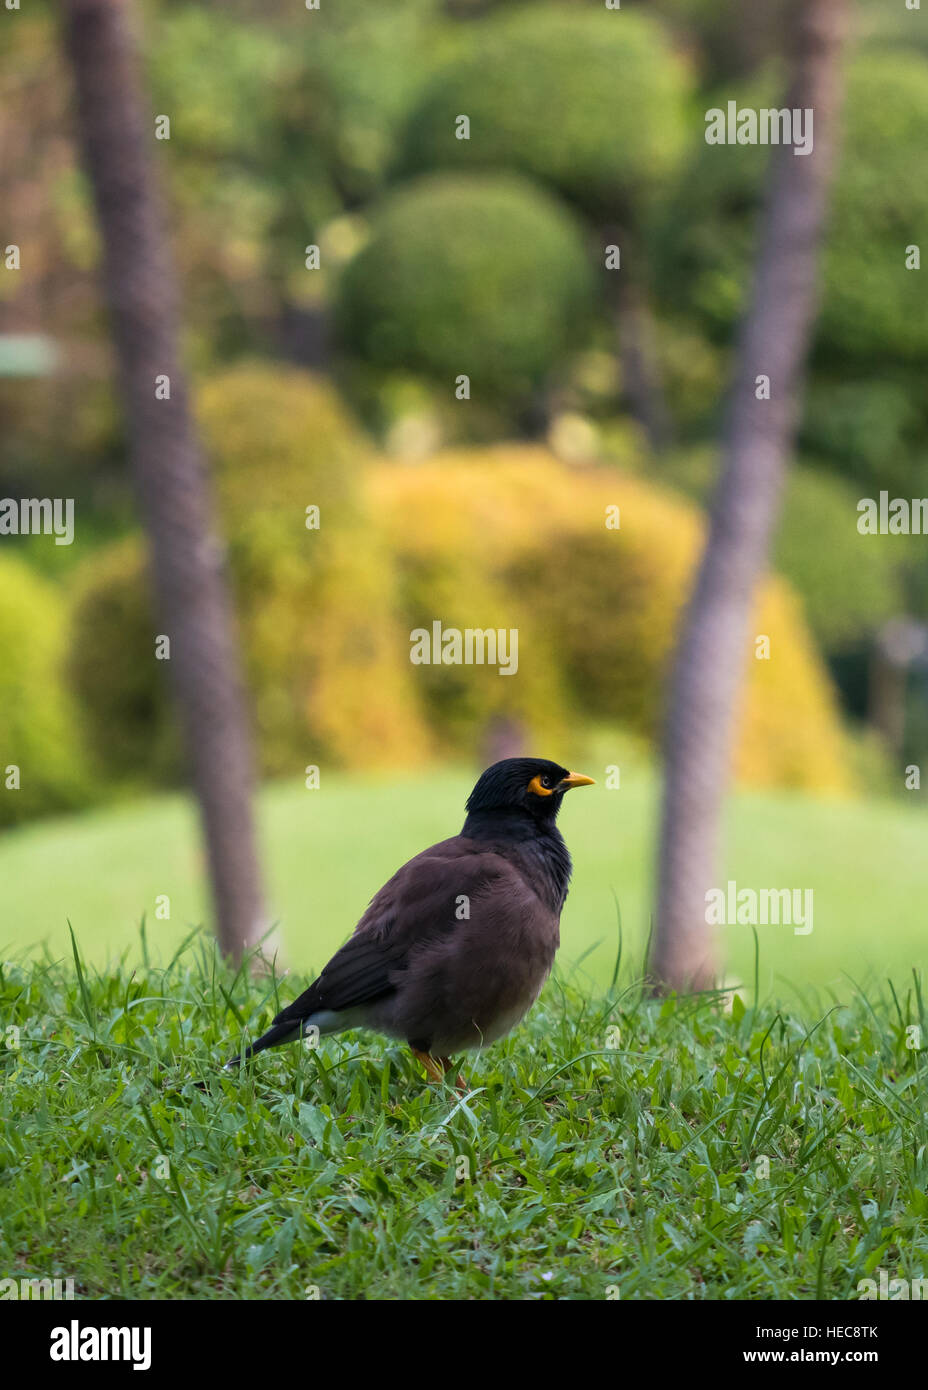 La common myna (Acridotheres tristis) herbe verte feild with copy space Banque D'Images